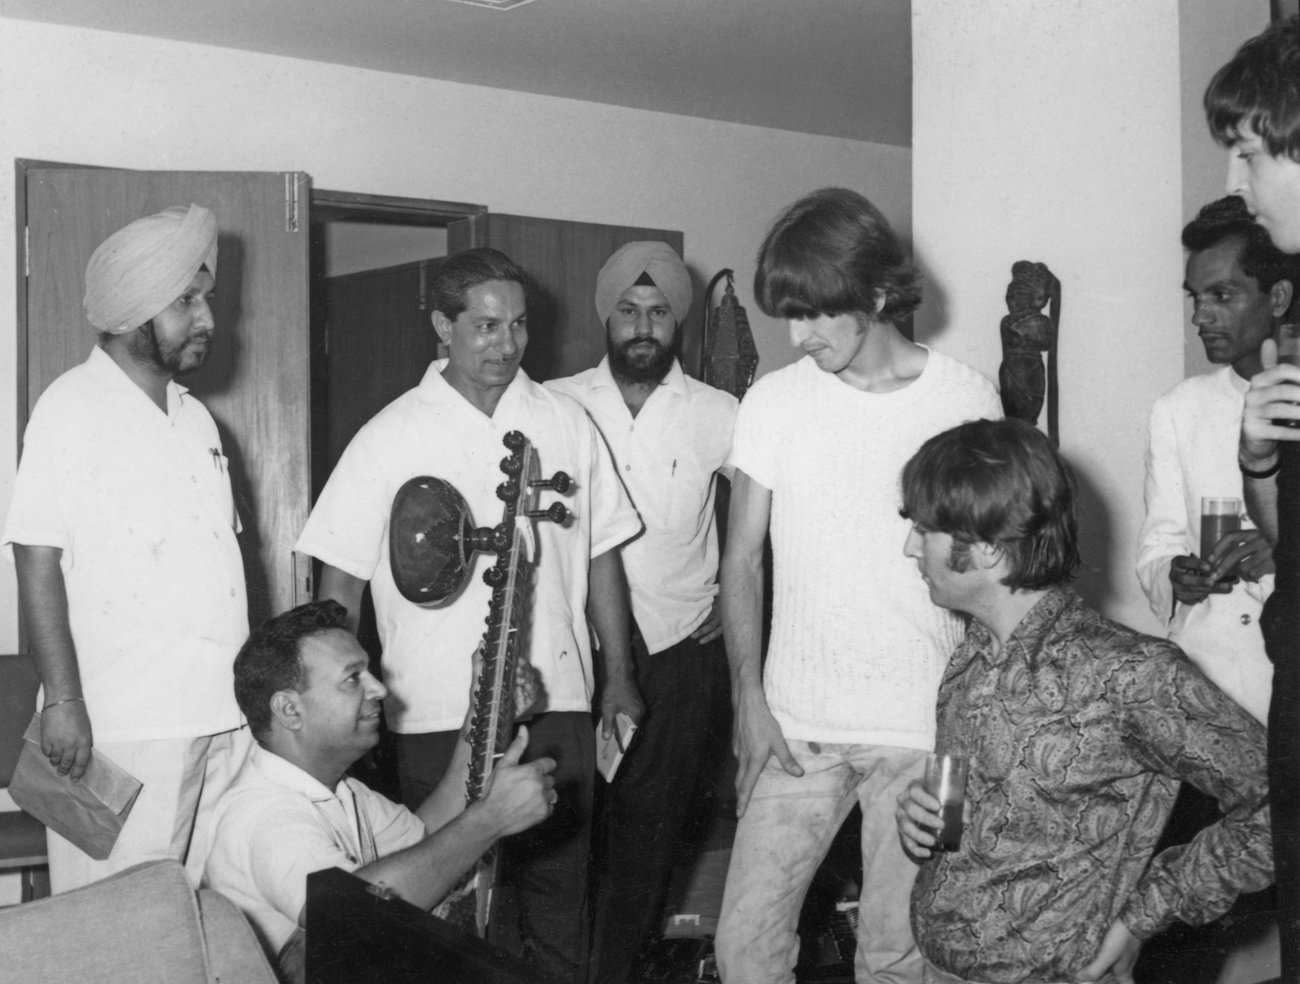 George Harrison and The Beatles learning about Indian music in 1966.